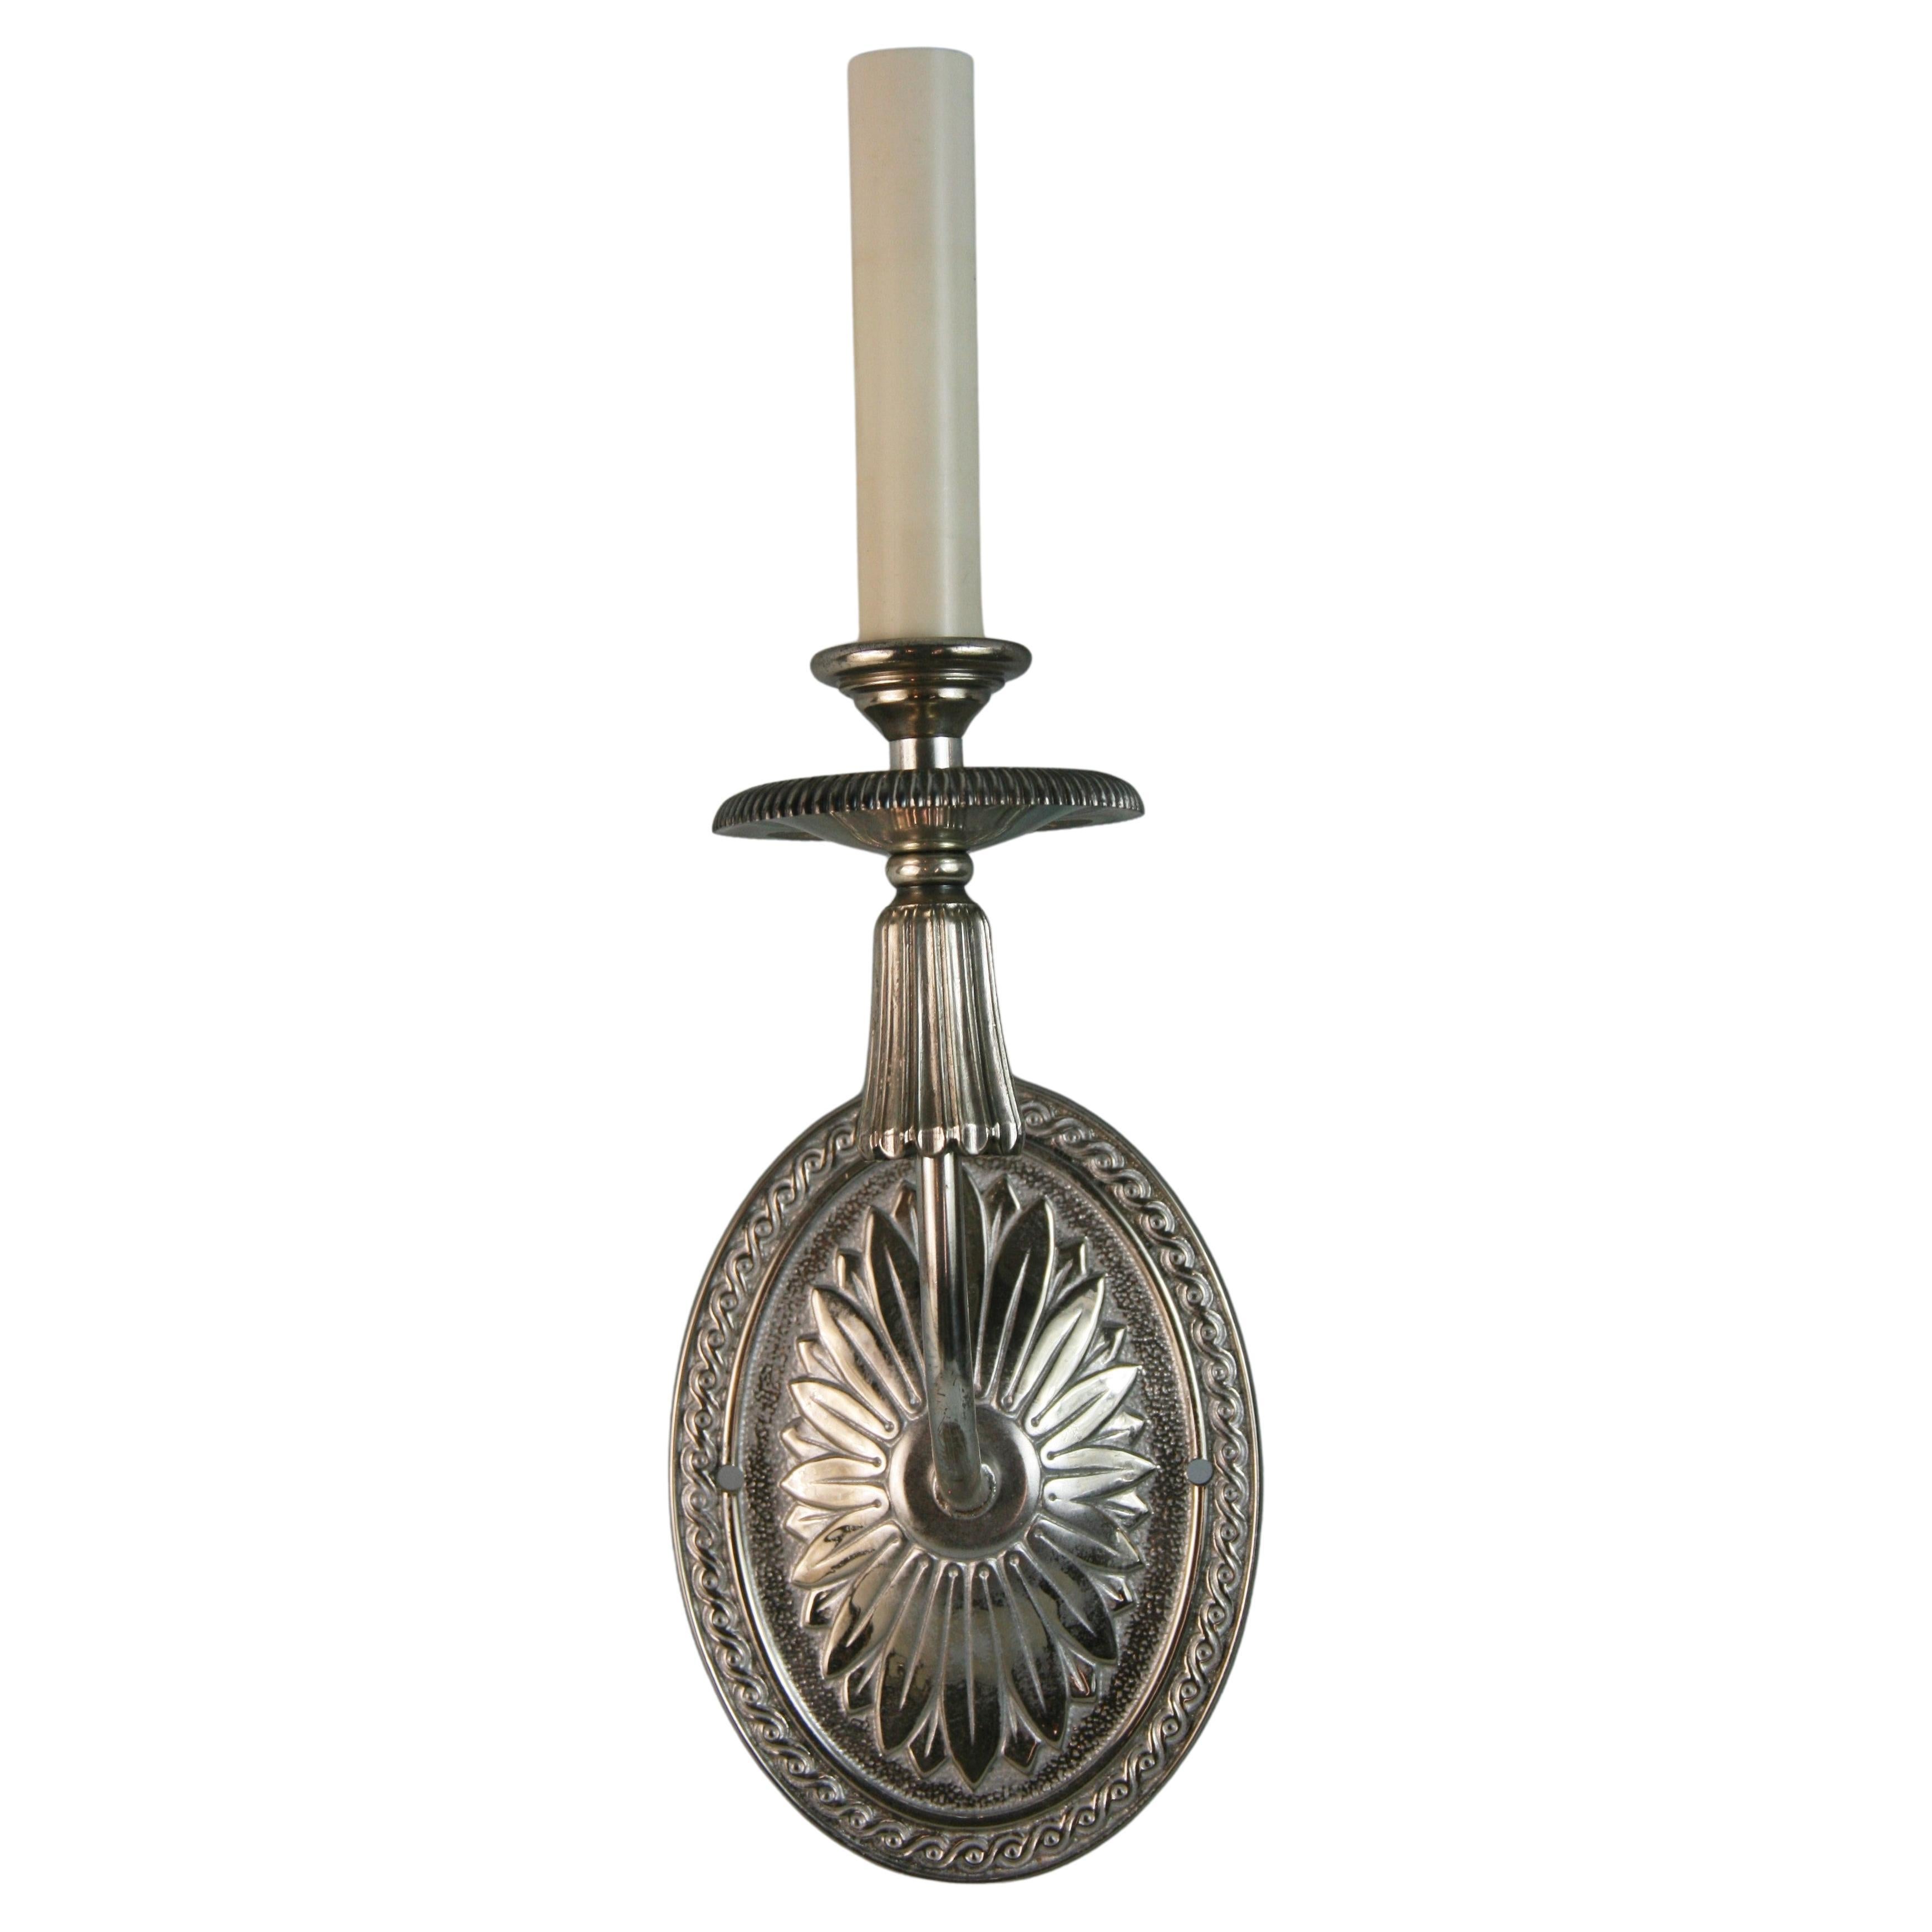 1527 Air French Nickeled brass sconces
Rewired takes 60 watt candelabra based bulbs
3 pair available 
Priced per pair